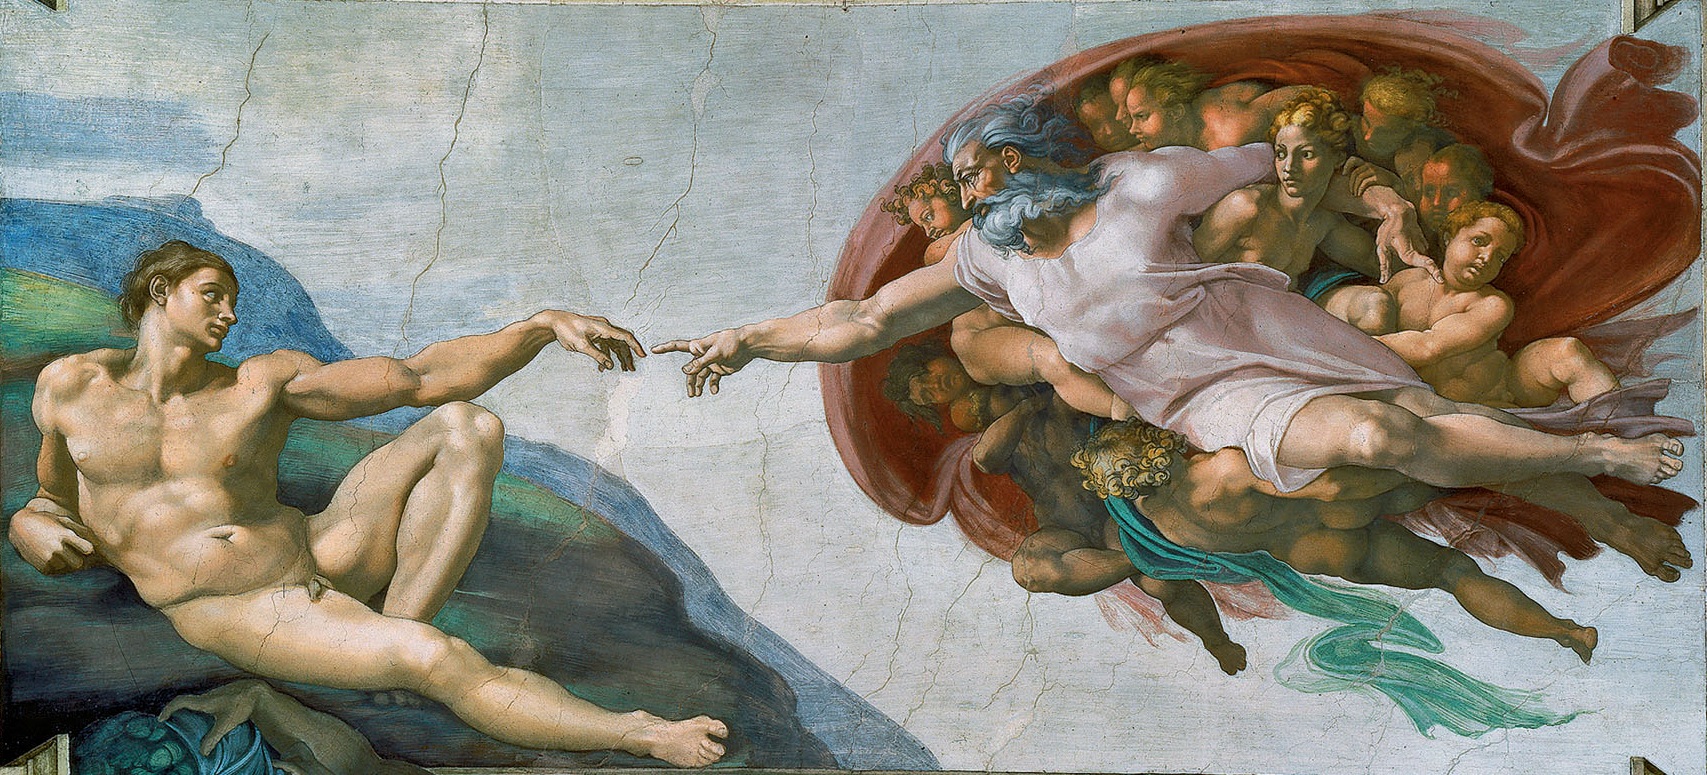 The Creation of Adam fresco painting by Michelangelo